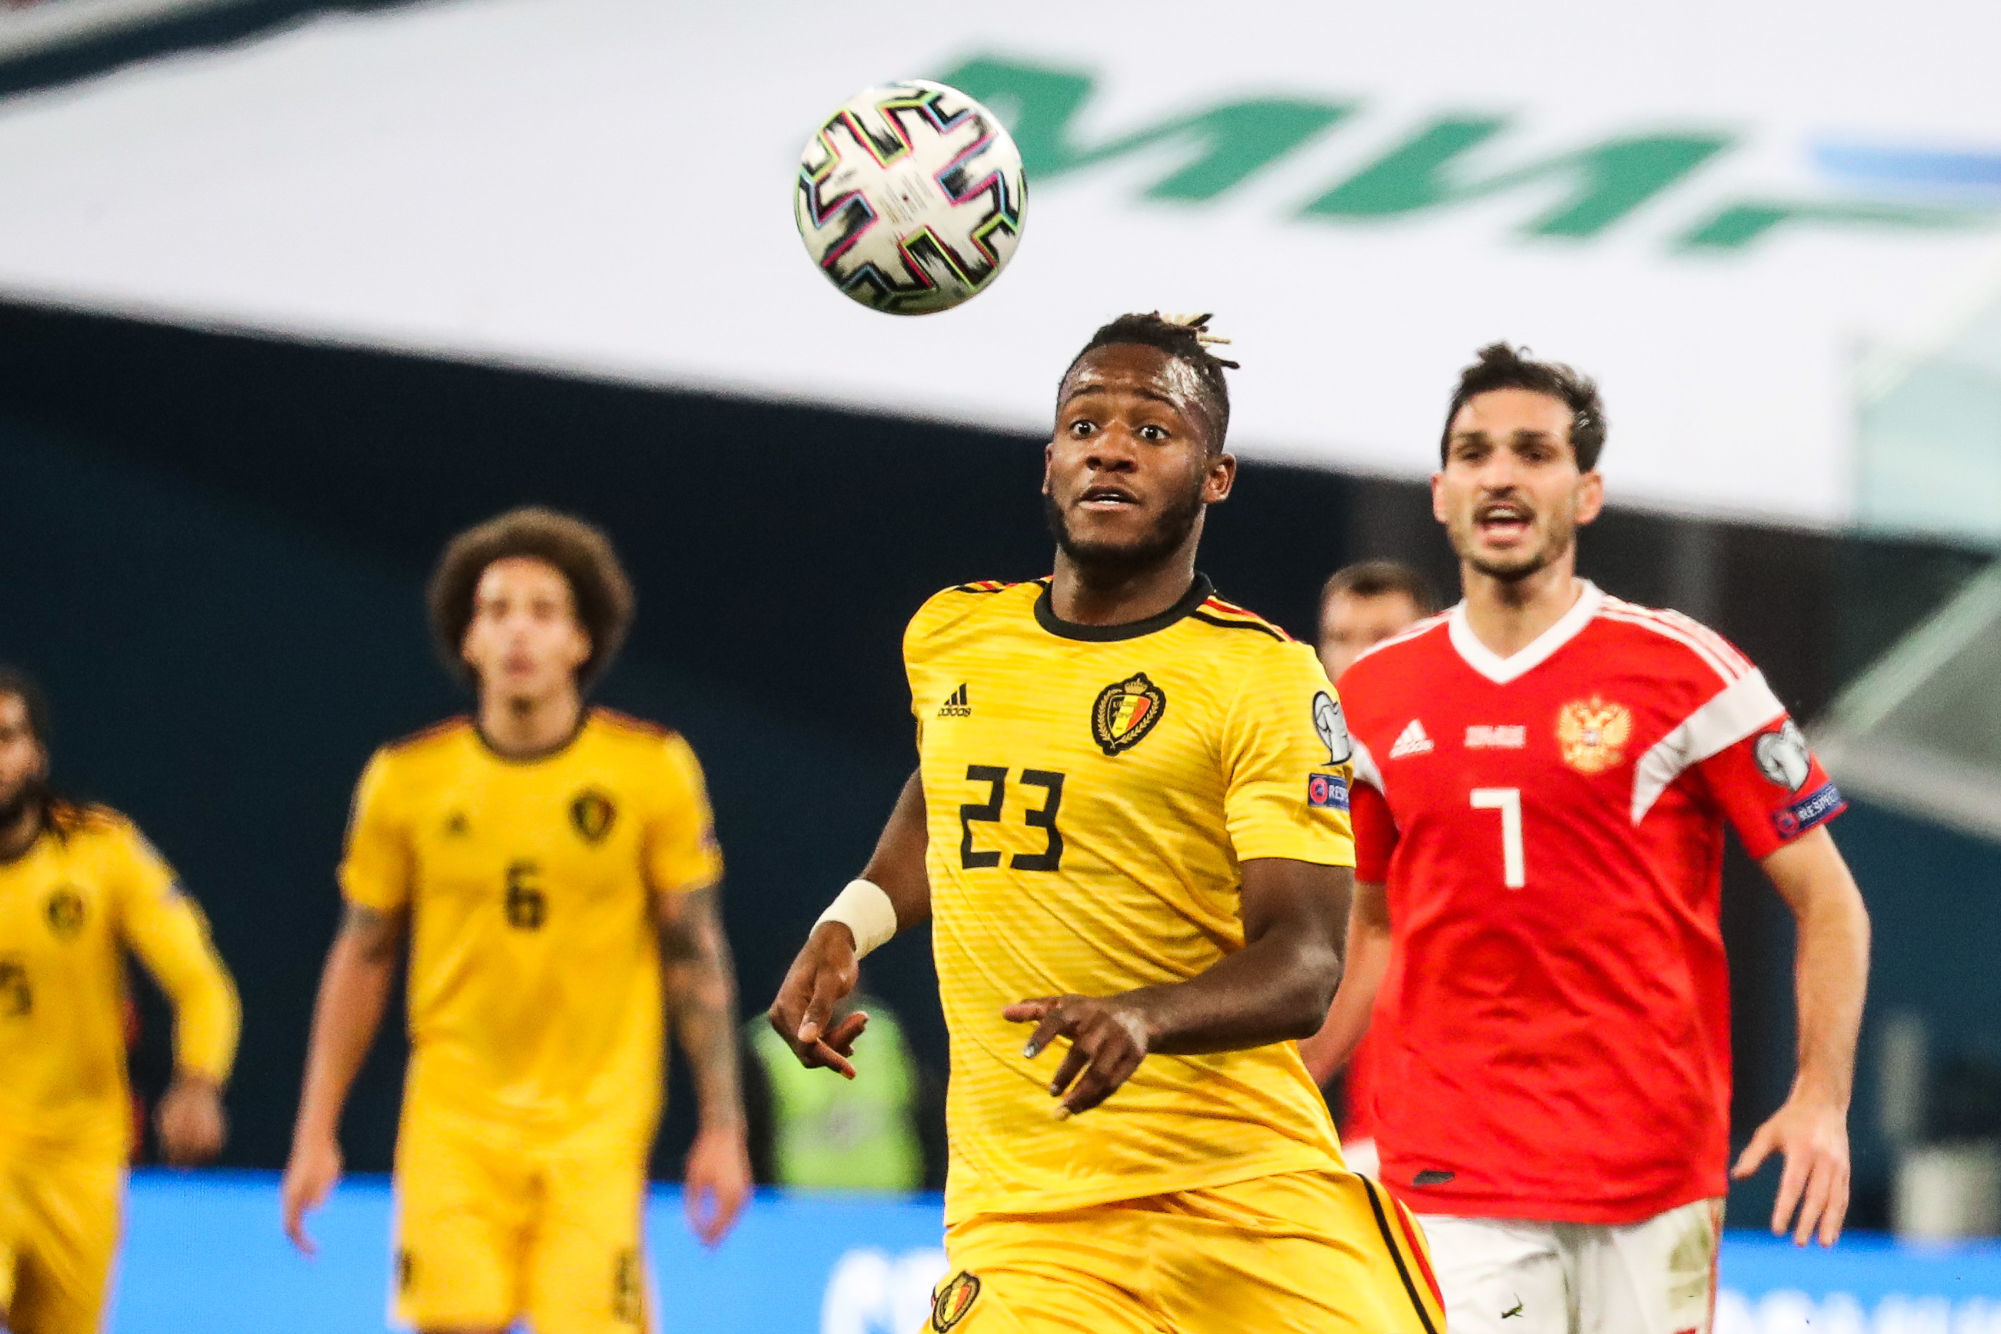 Belgium's Michy Batshuayi pictured in action during the match of the Belgian national soccer team the Red Devils against Russia, Saturday 16 November 2019, in Saint-Petersburg, Russia, a qualification game for the Euro2020 tournament.
BELGA PHOTO BRUNO FAHY 
Photo by Icon Sport - Stade Krestovski - Saint Petersbourg (Russie)